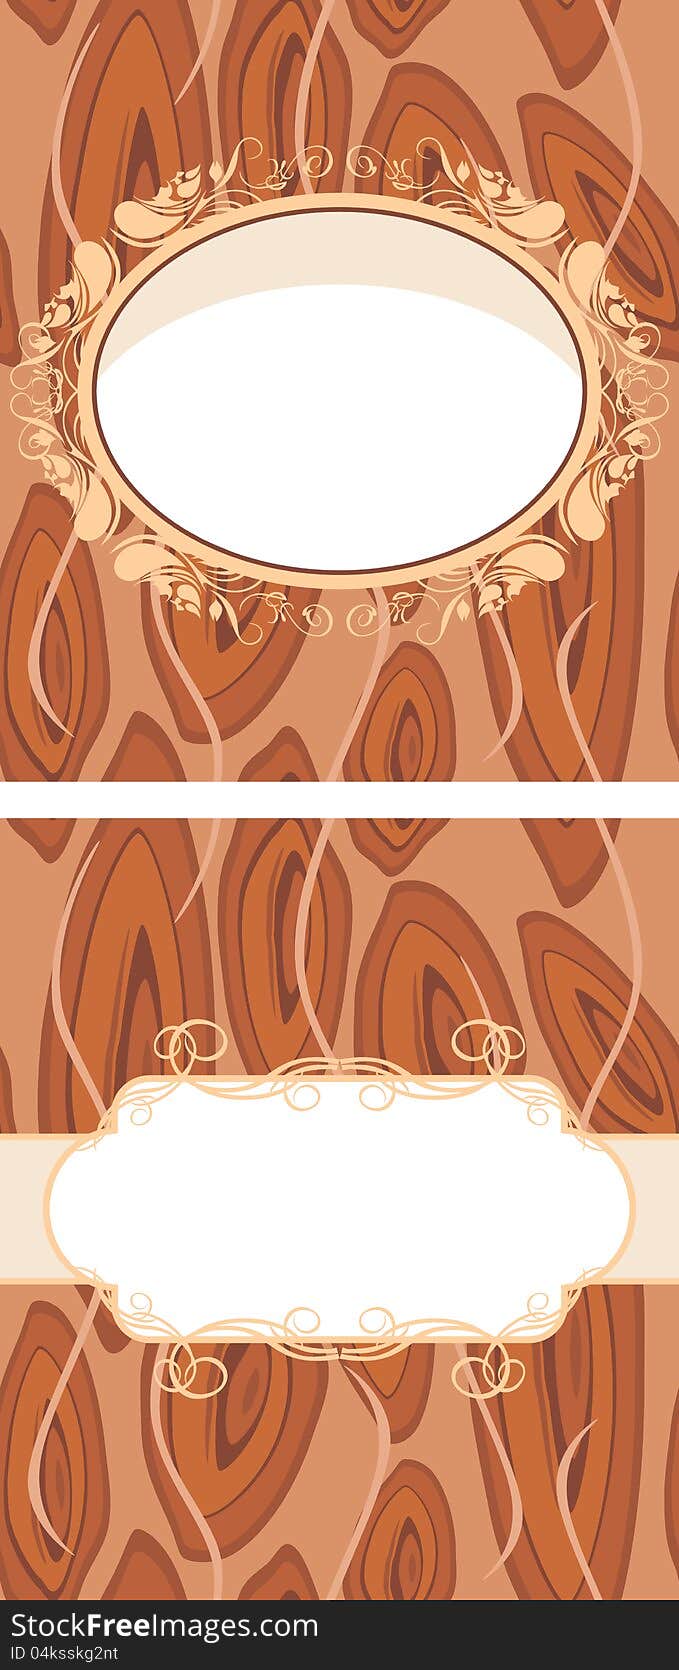 Ornamental frame on the brown abstract background. Two patterns. Illustration